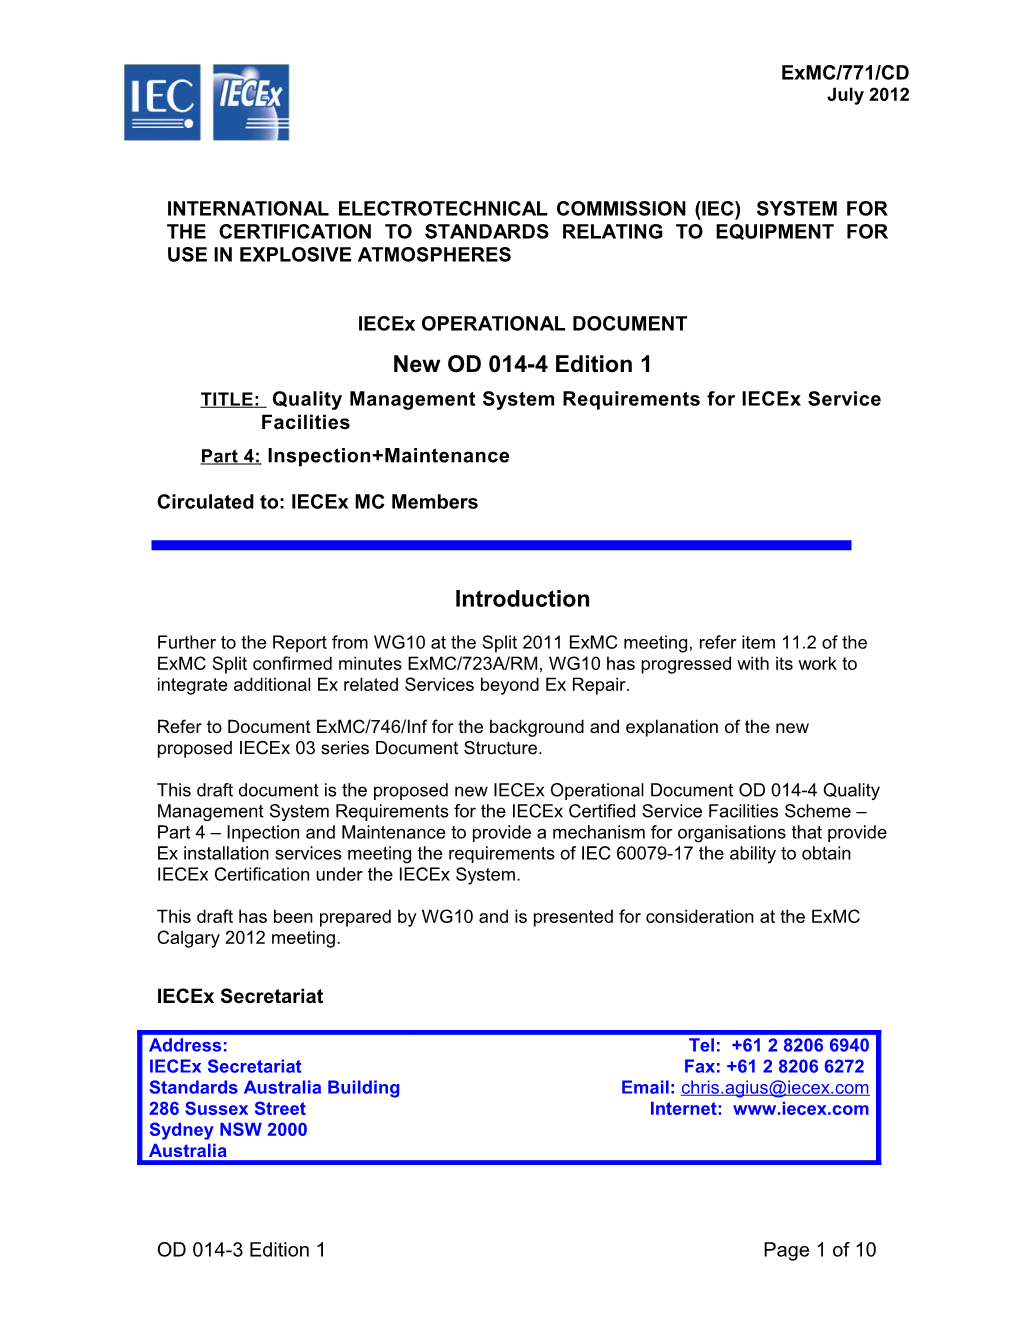 TITLE: Quality Management System Requirements for Iecex Service Facilities